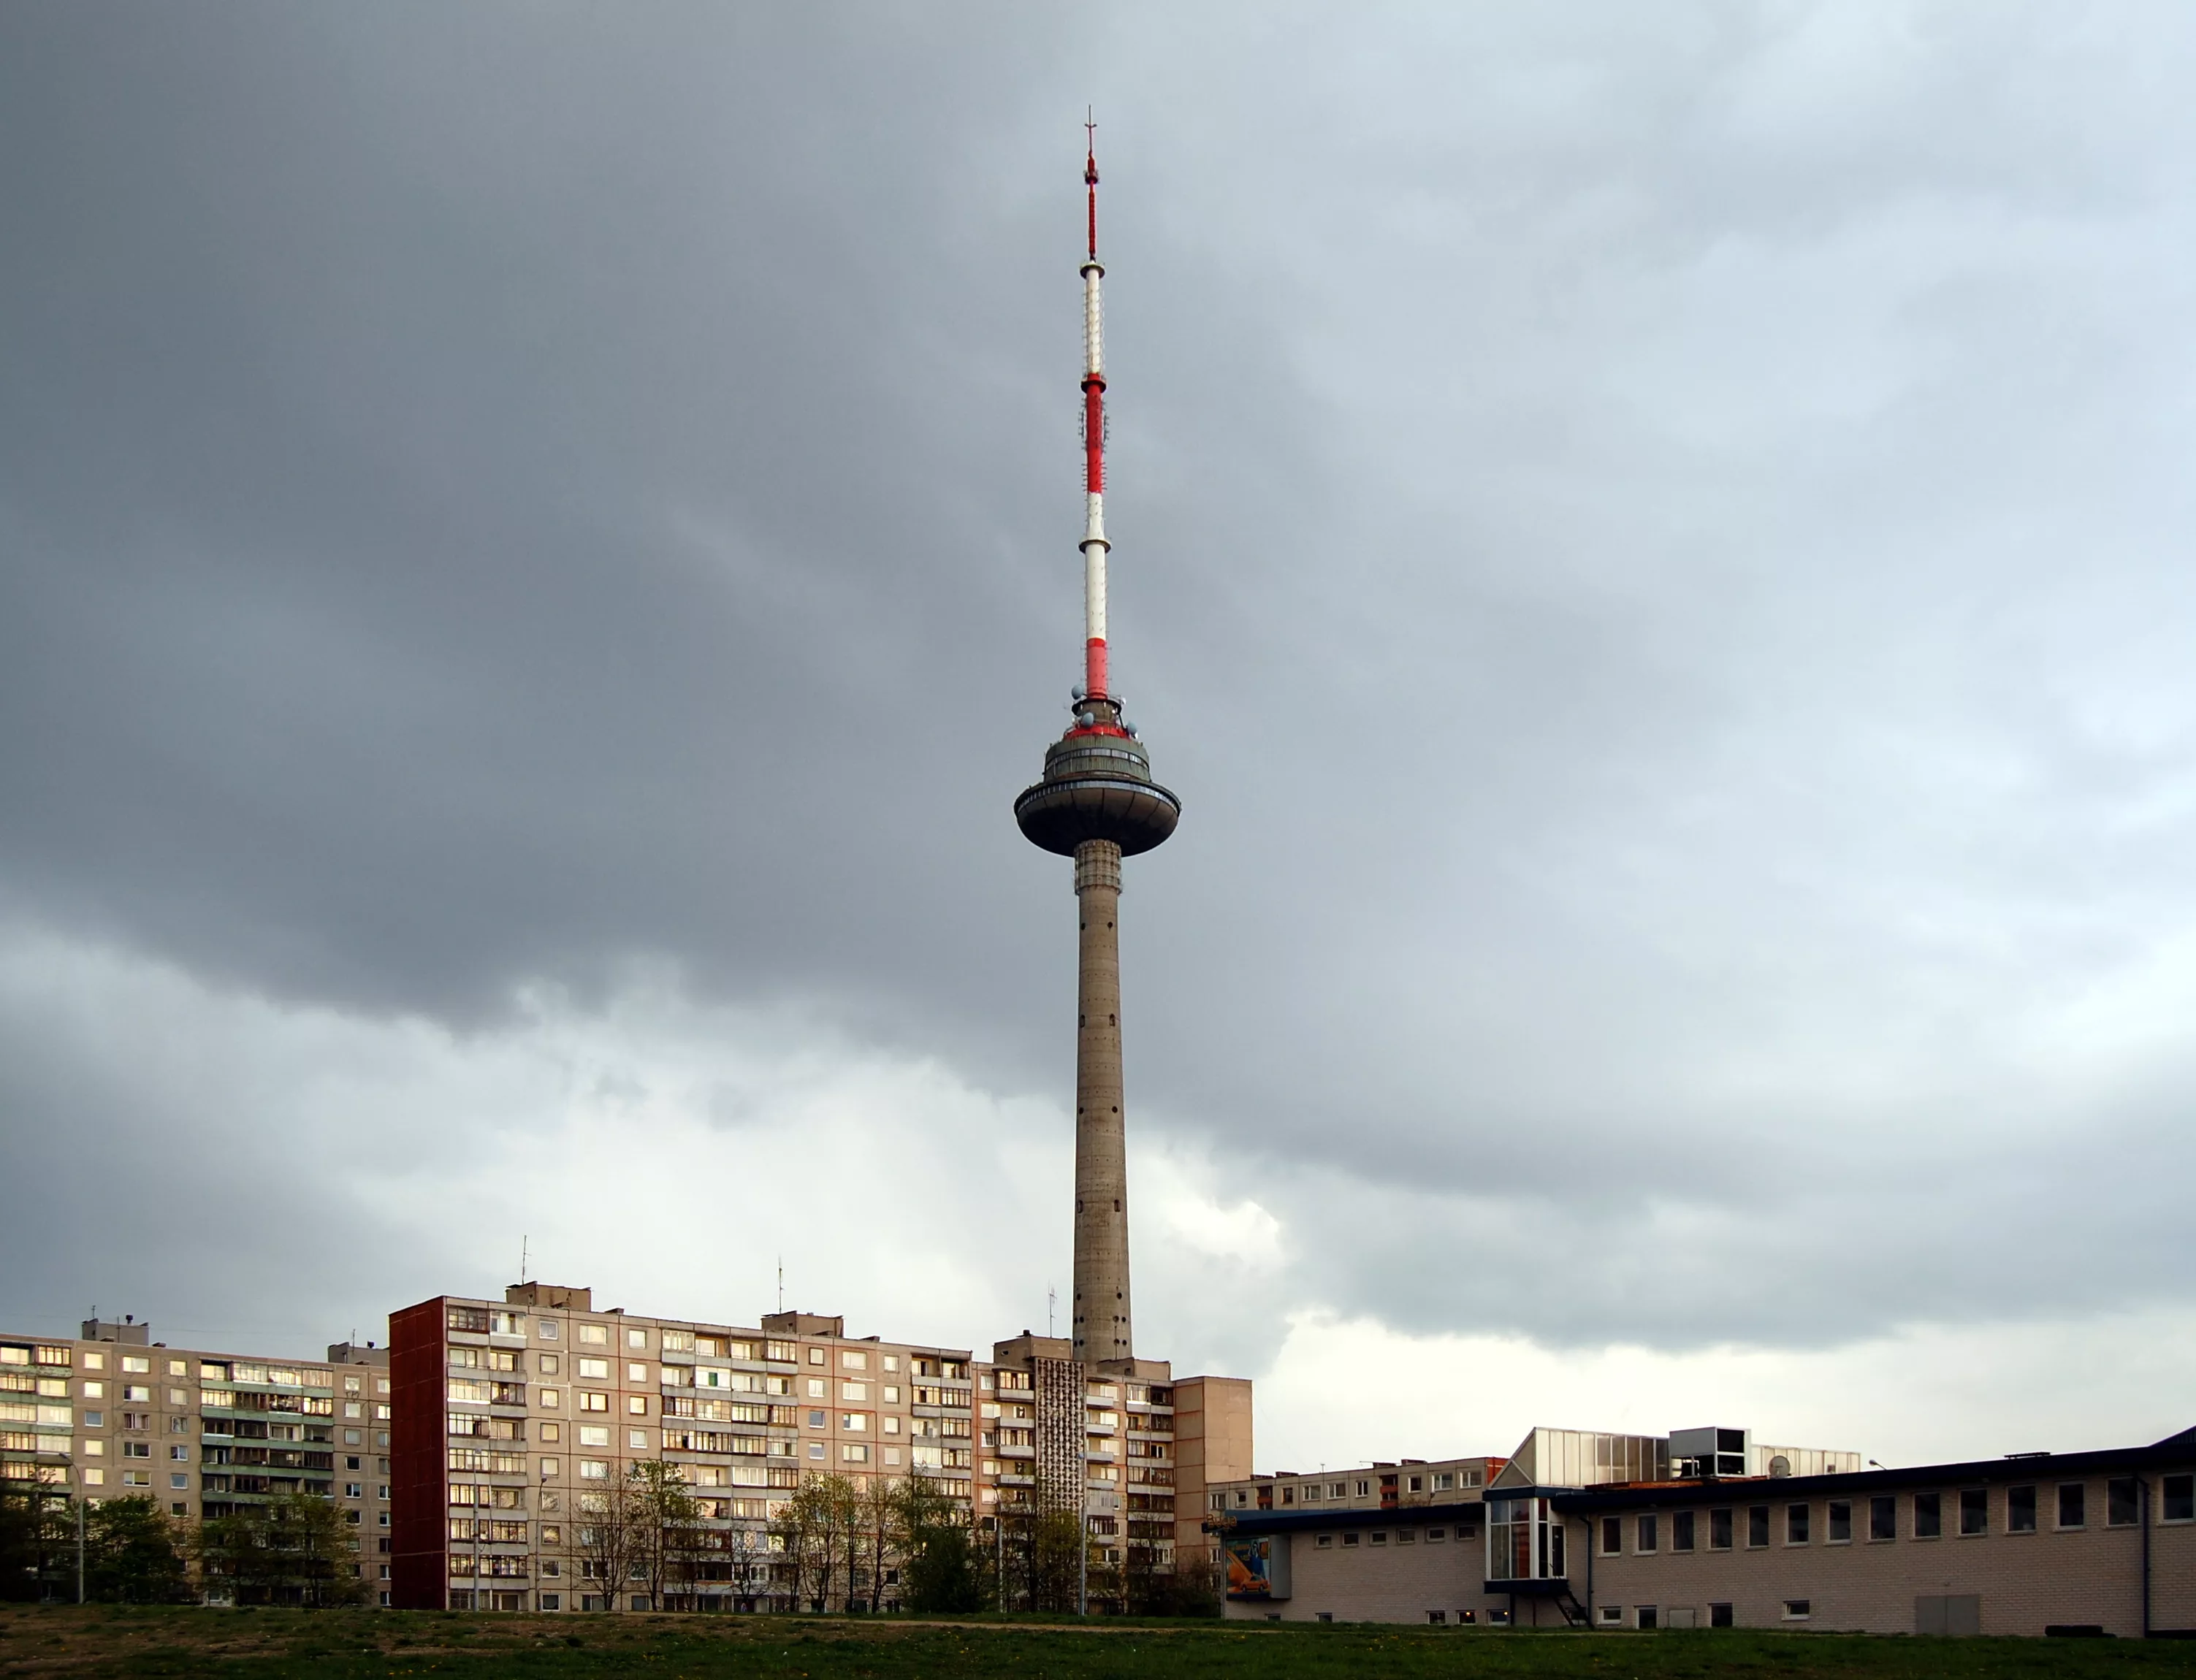 Vilnius TV Tower in Lithuania, Europe | Observation Decks - Rated 3.7